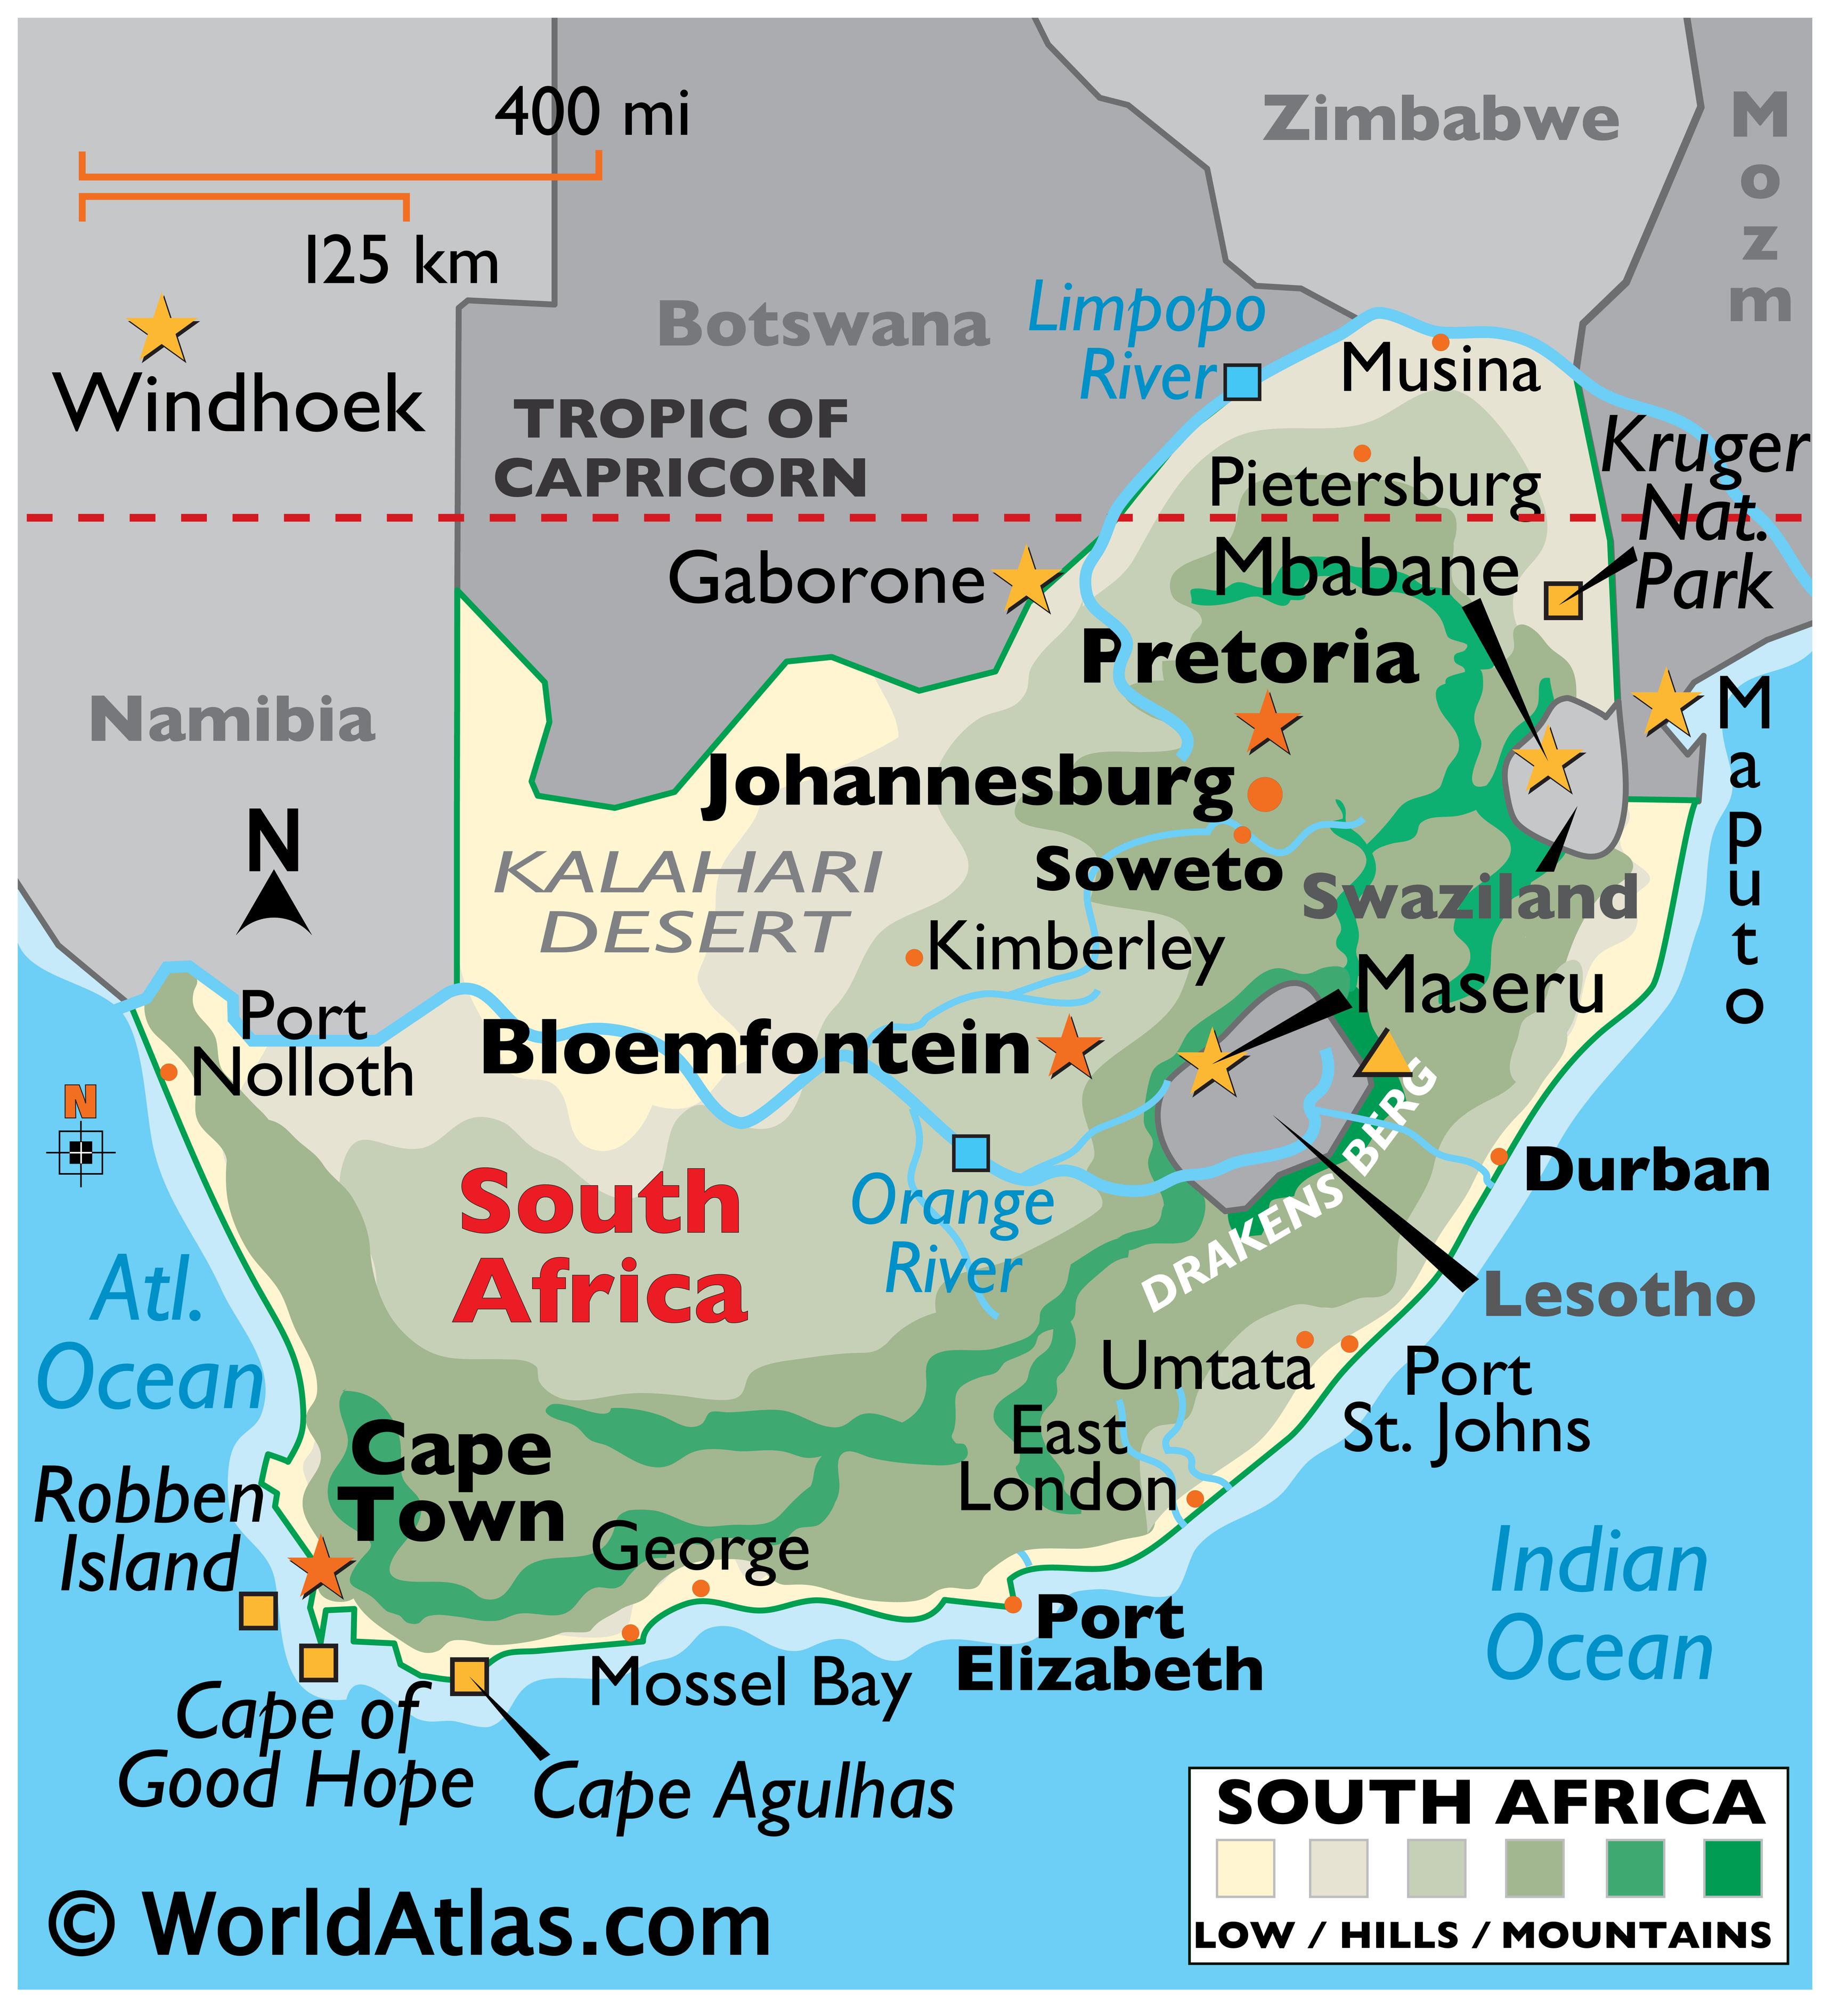 Western Cape  South African Province, History, Culture & Wildlife